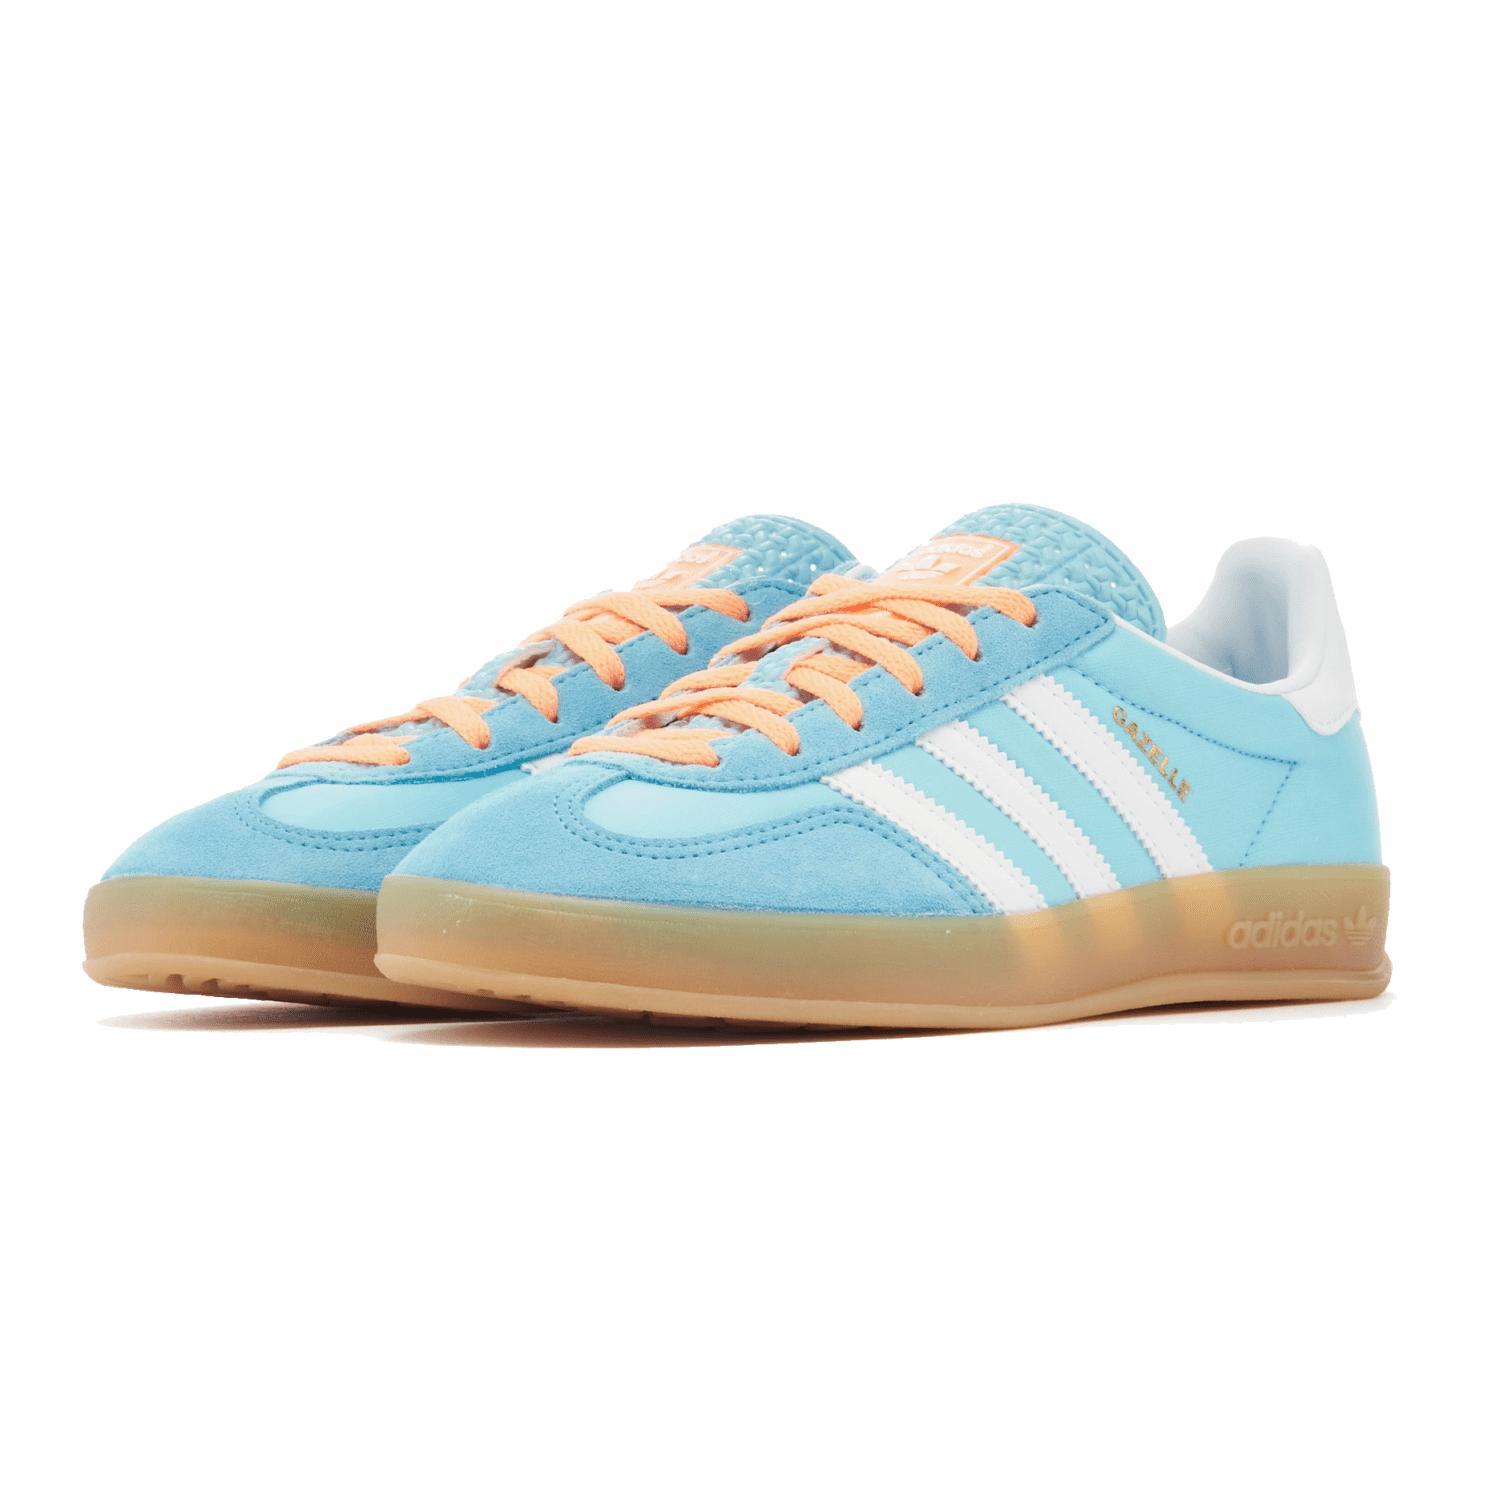 Lyst for And Men Zapatillas Indoor Cloud | Blue, Gazelle White Gum Preloved adidas